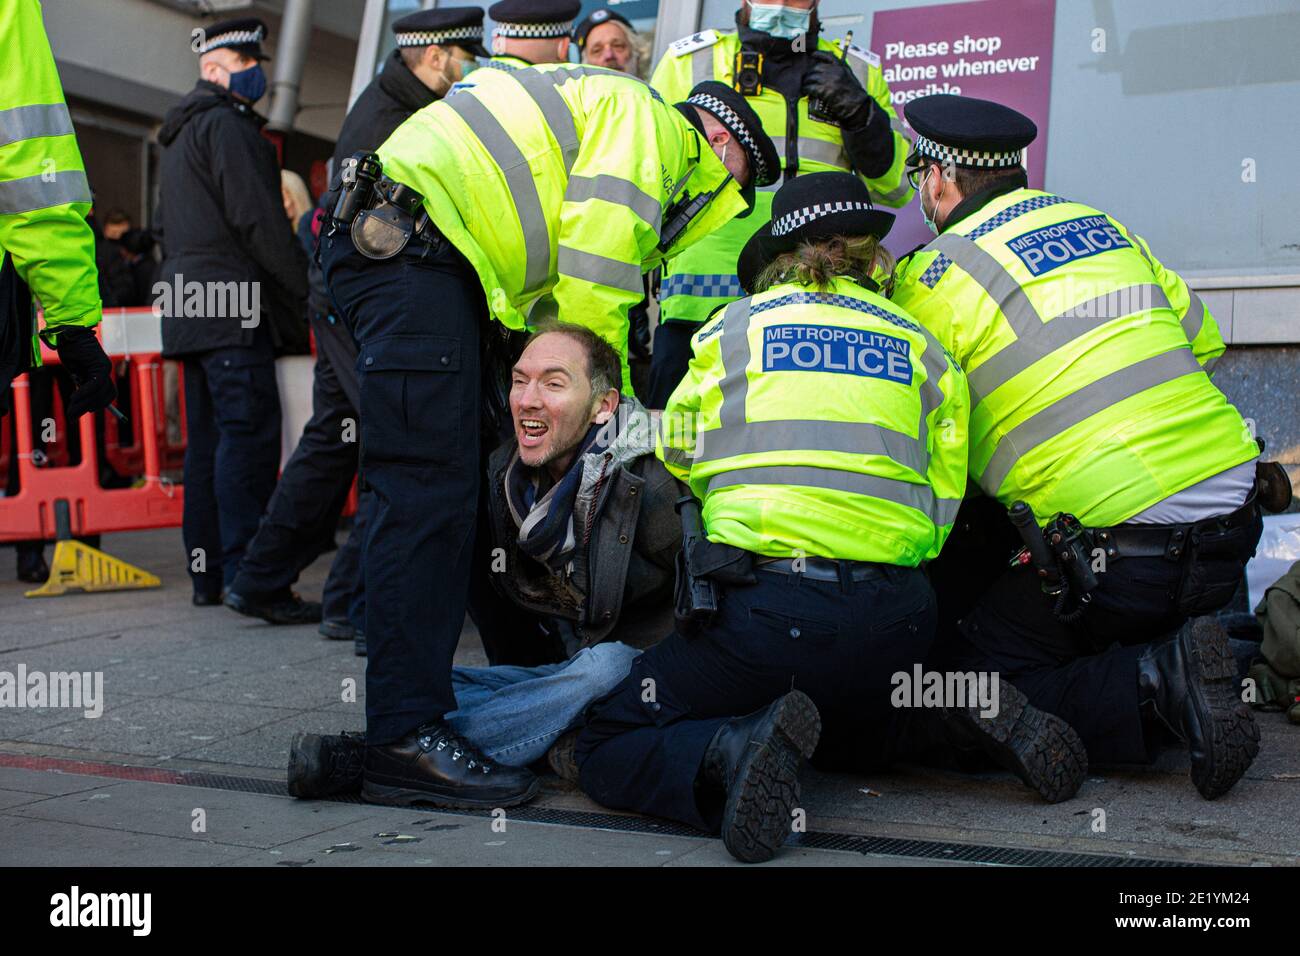 A protester is arrested by Police on Clapham High Street during the anti-lockdown demonstration on January 9, 2021 in London, England. Stock Photo